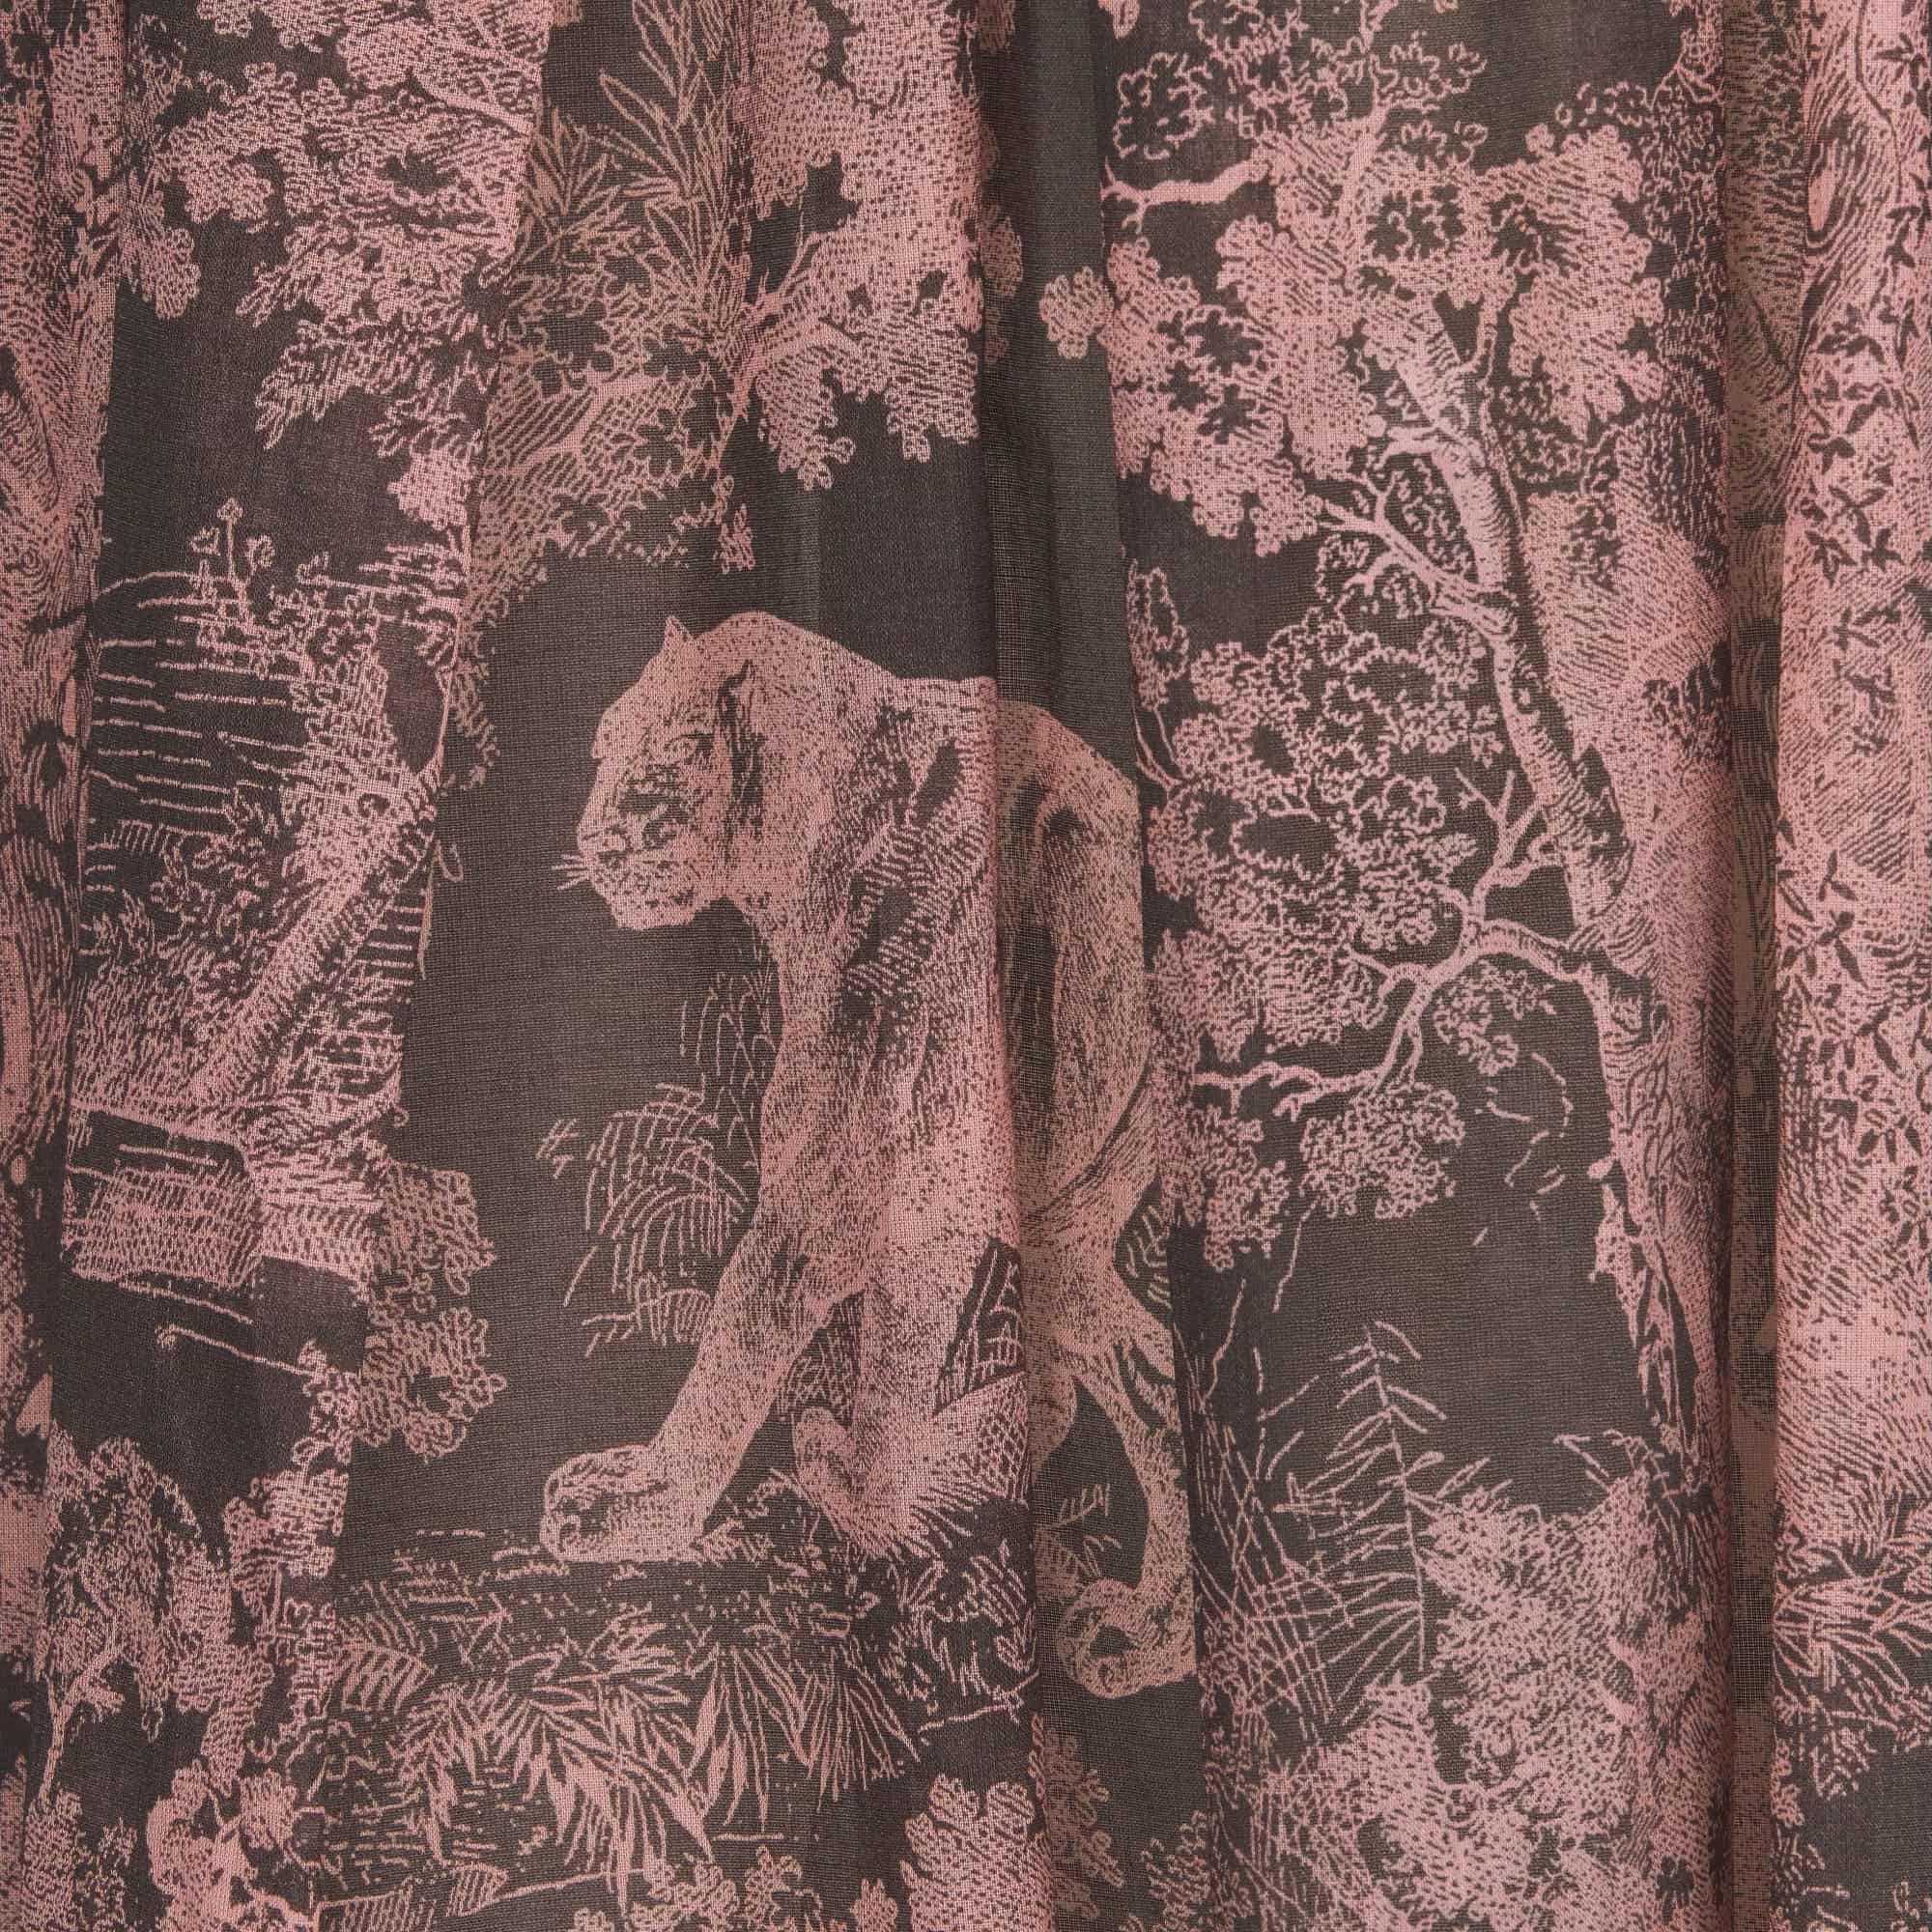 VÁY NỮ DÀI DIORIVIERA FLARED SKIRT GRAY AND PINK COTTON MUSLIN WITH TOILE DE JOUY REVERSE MOTIF 9